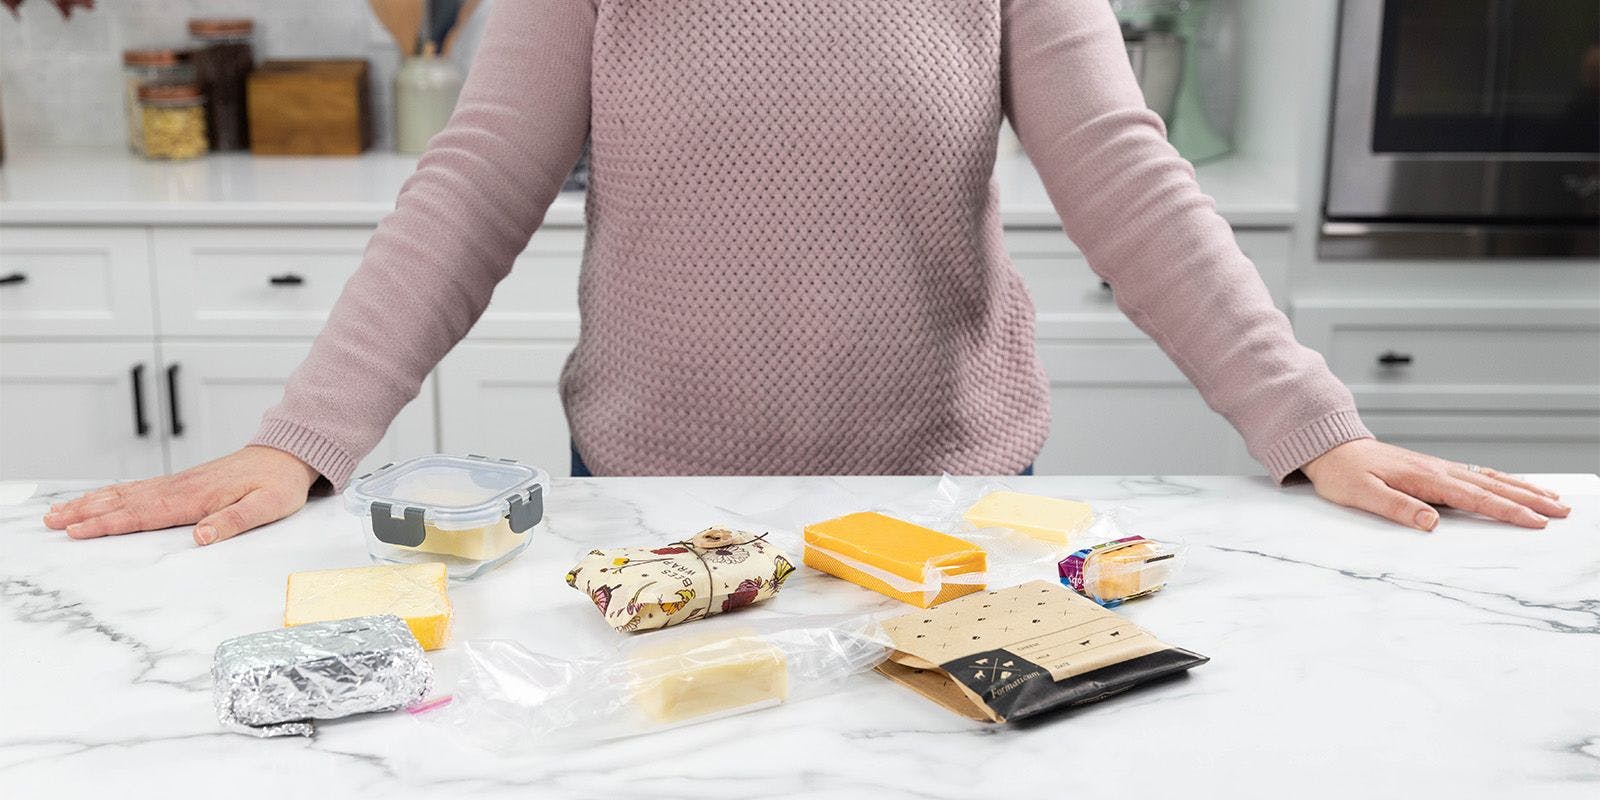 Examples of ways to store cheeses including wrapped in foil, plastic wrap and cheese paper.